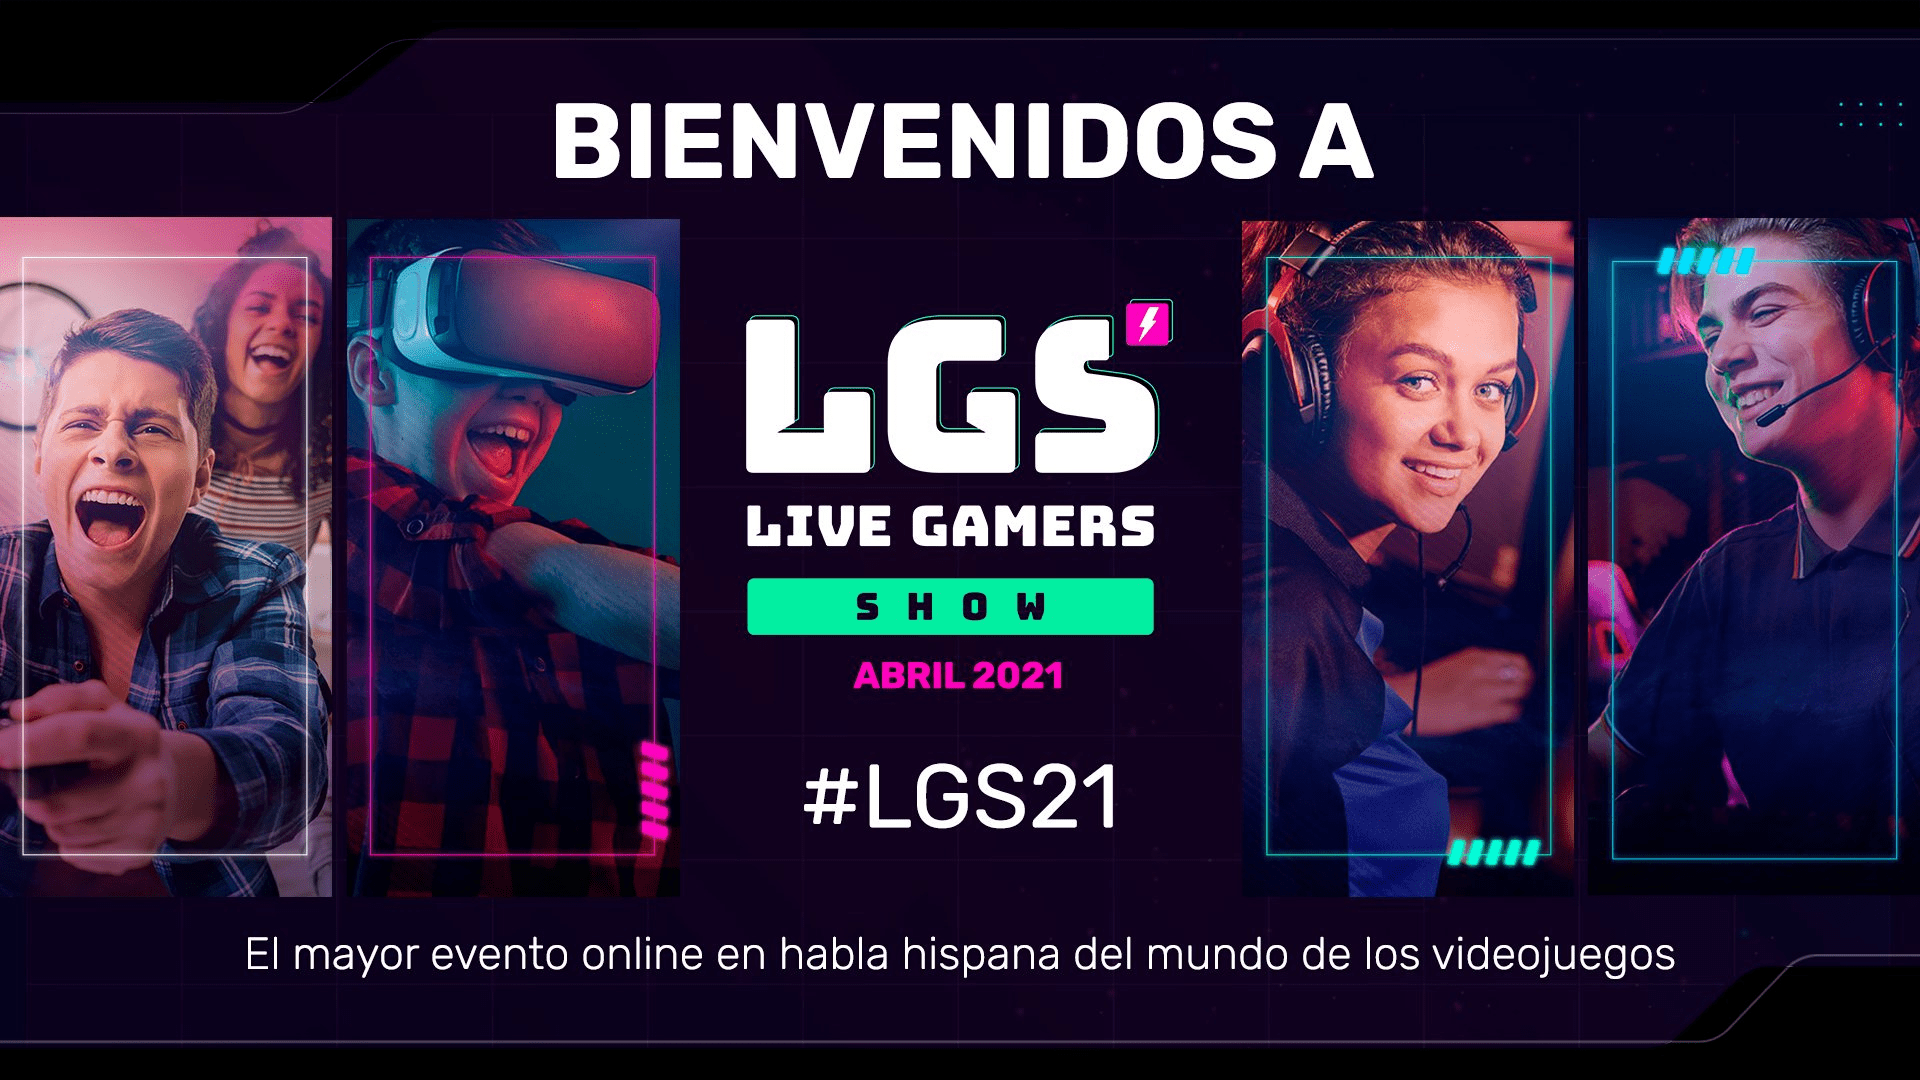 Liver-Gamers-Show-evento-gaming-y-eSports